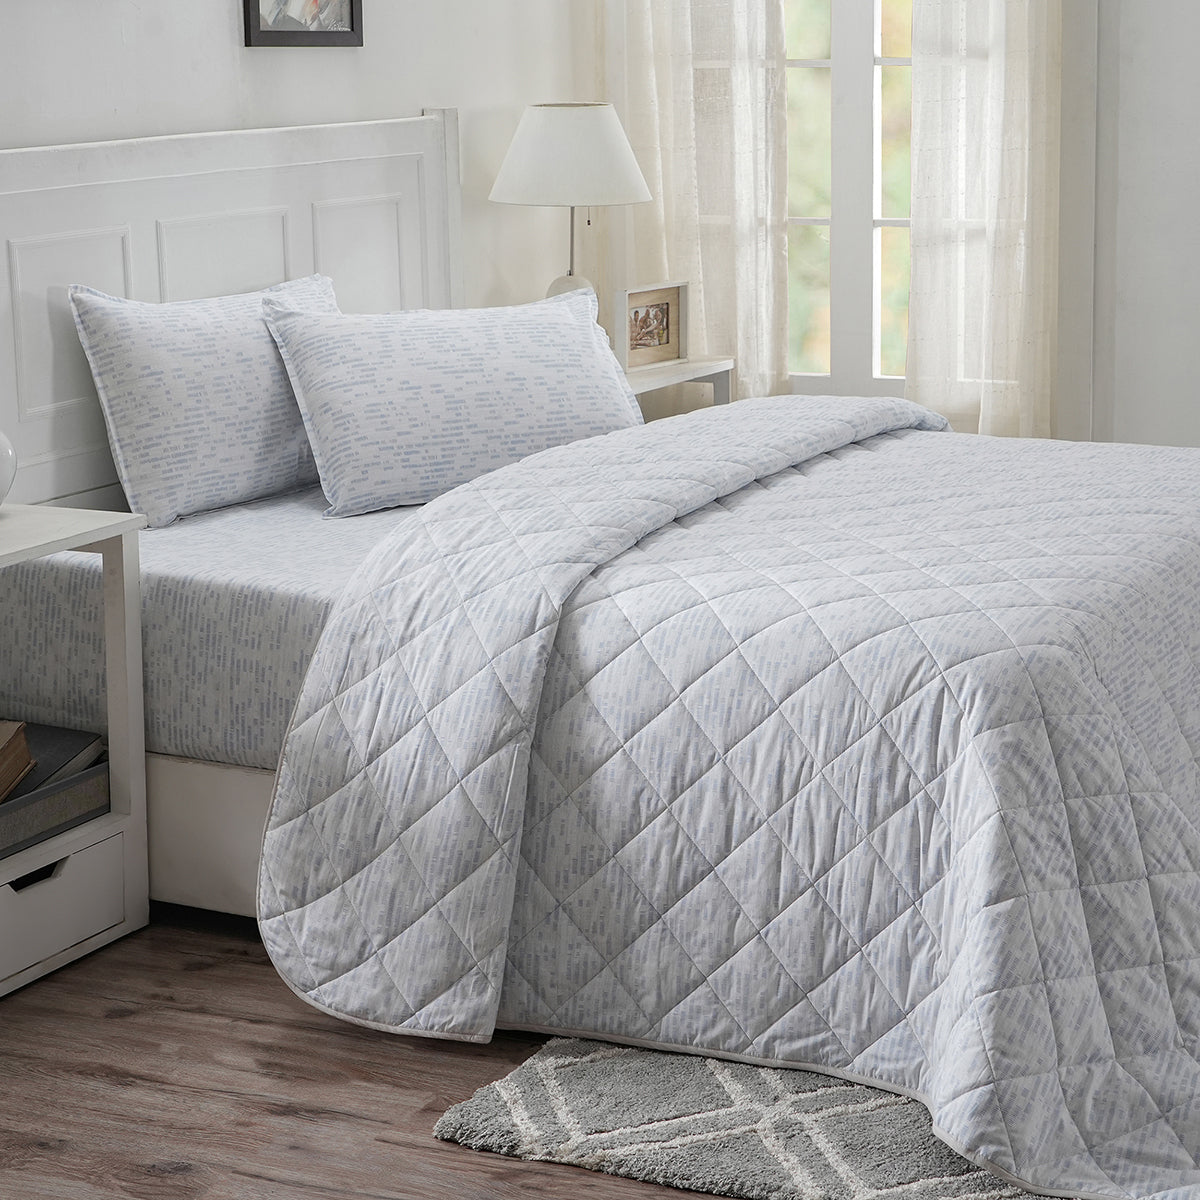 Optimist Bloom Canopus 4PC Quilt/Quilted Bed Cover Set